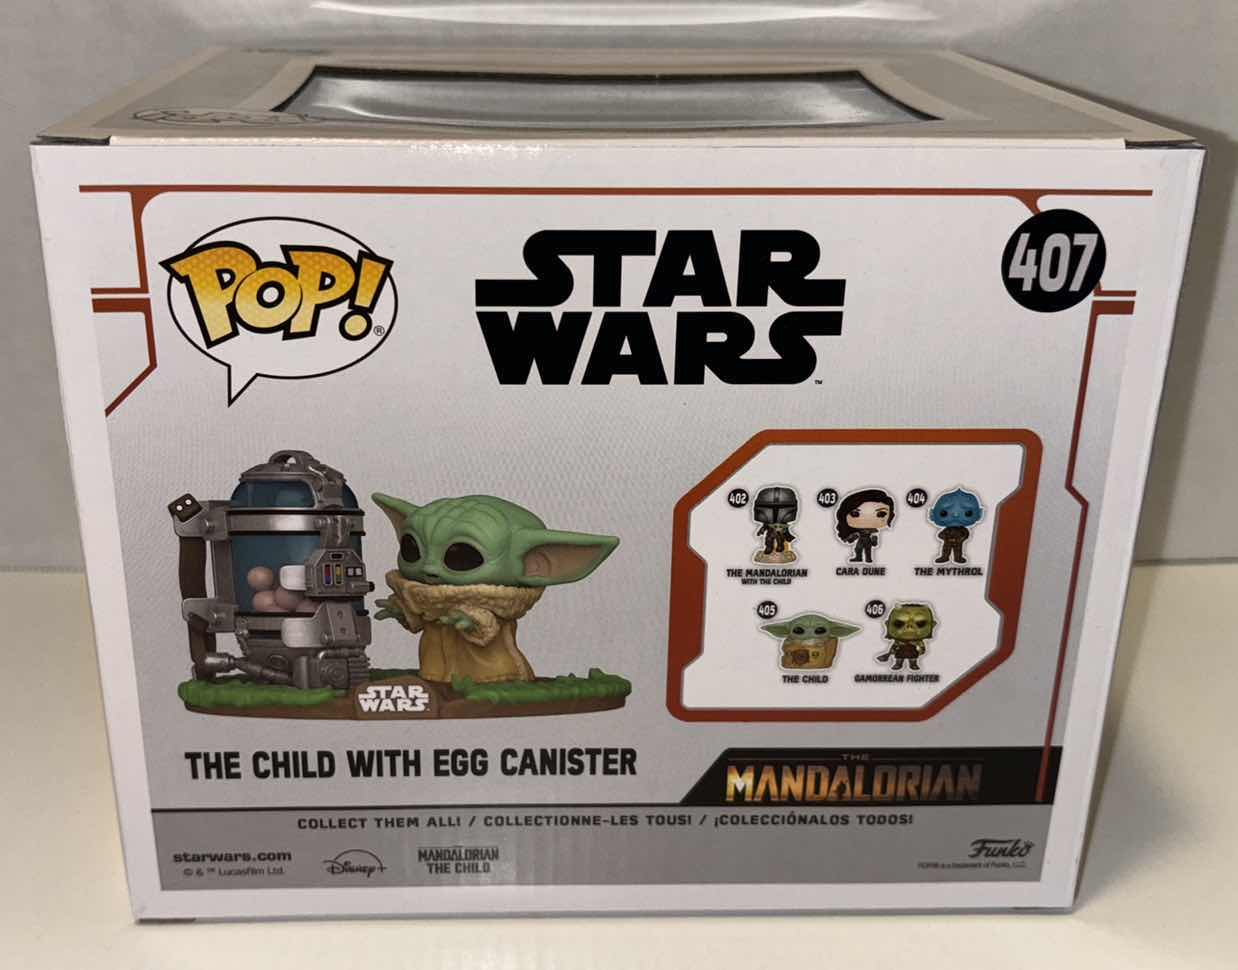 Photo 4 of NEW FUNKO POP! STAR WARS THE MANDALORIAN BOBBLE-HEAD VINYL FIGURE, #407 “THE CHILD WITH EGG CANISTER”